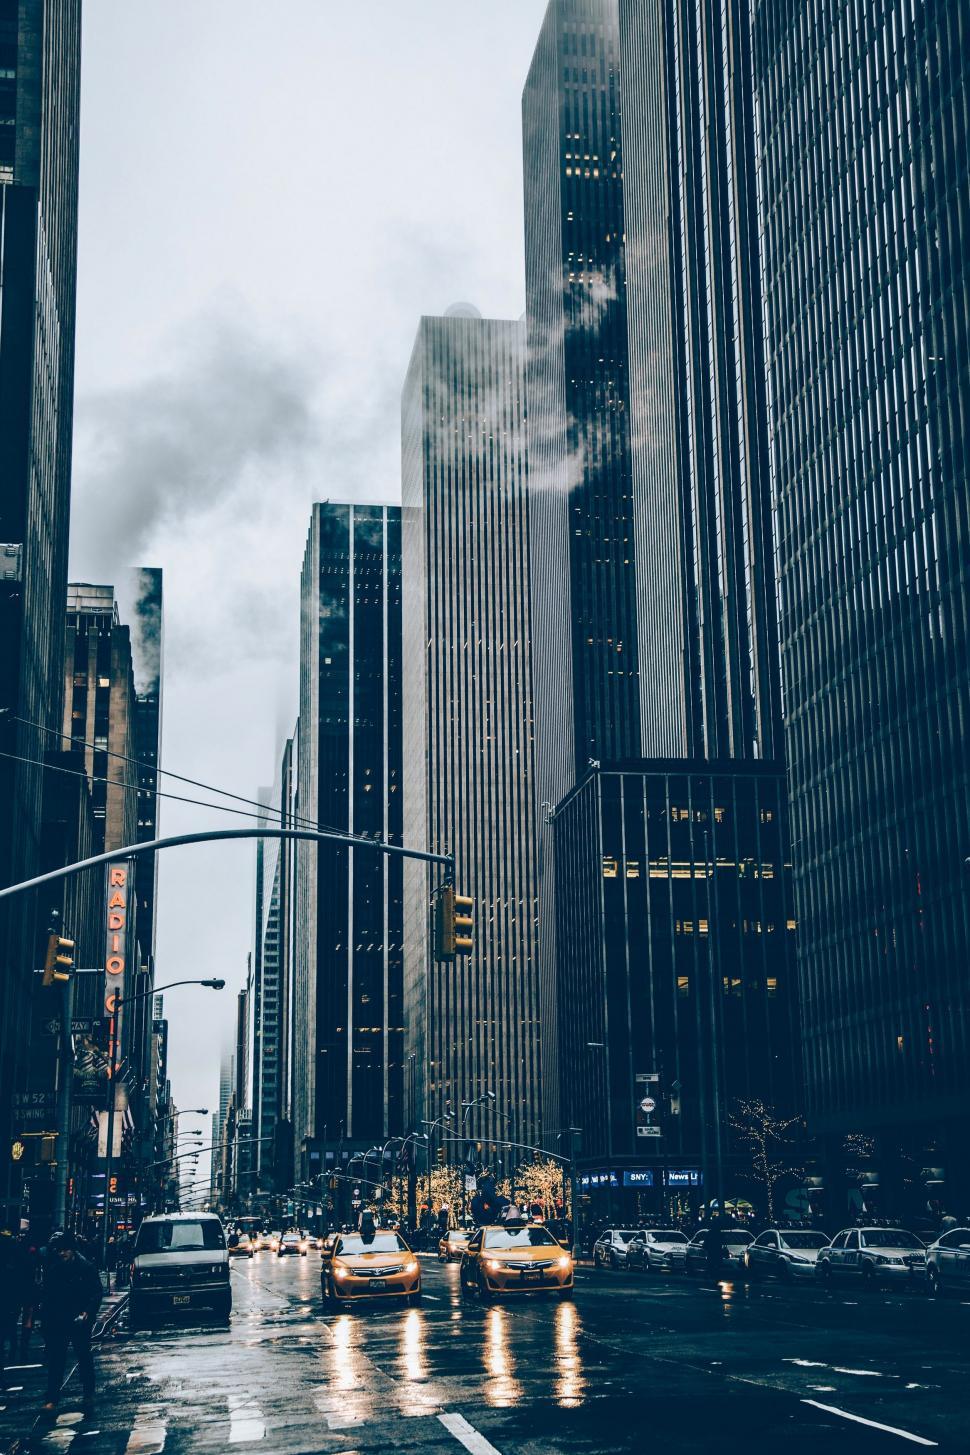 Free Image of Bustling City Street Filled With Tall Buildings 